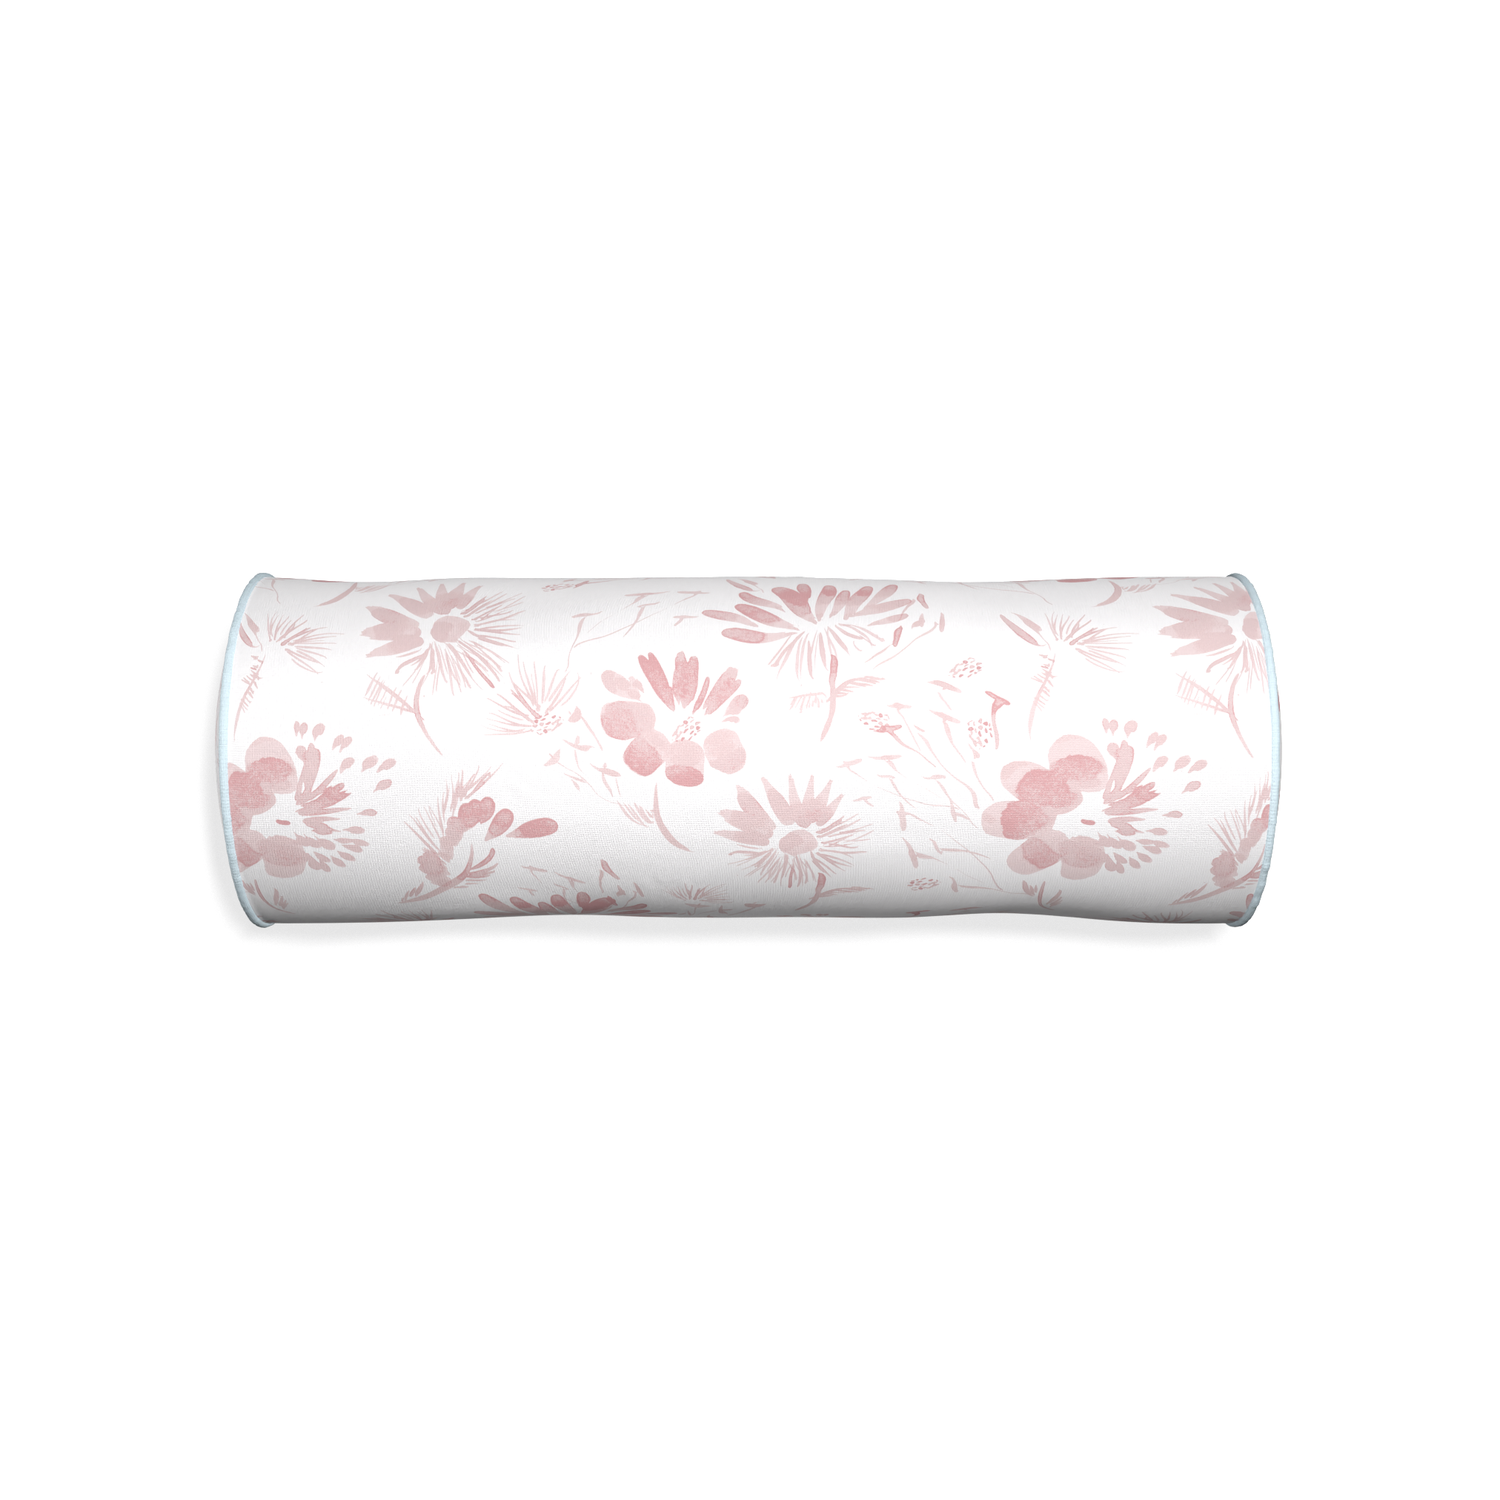 Bolster blake custom pink floralpillow with powder piping on white background